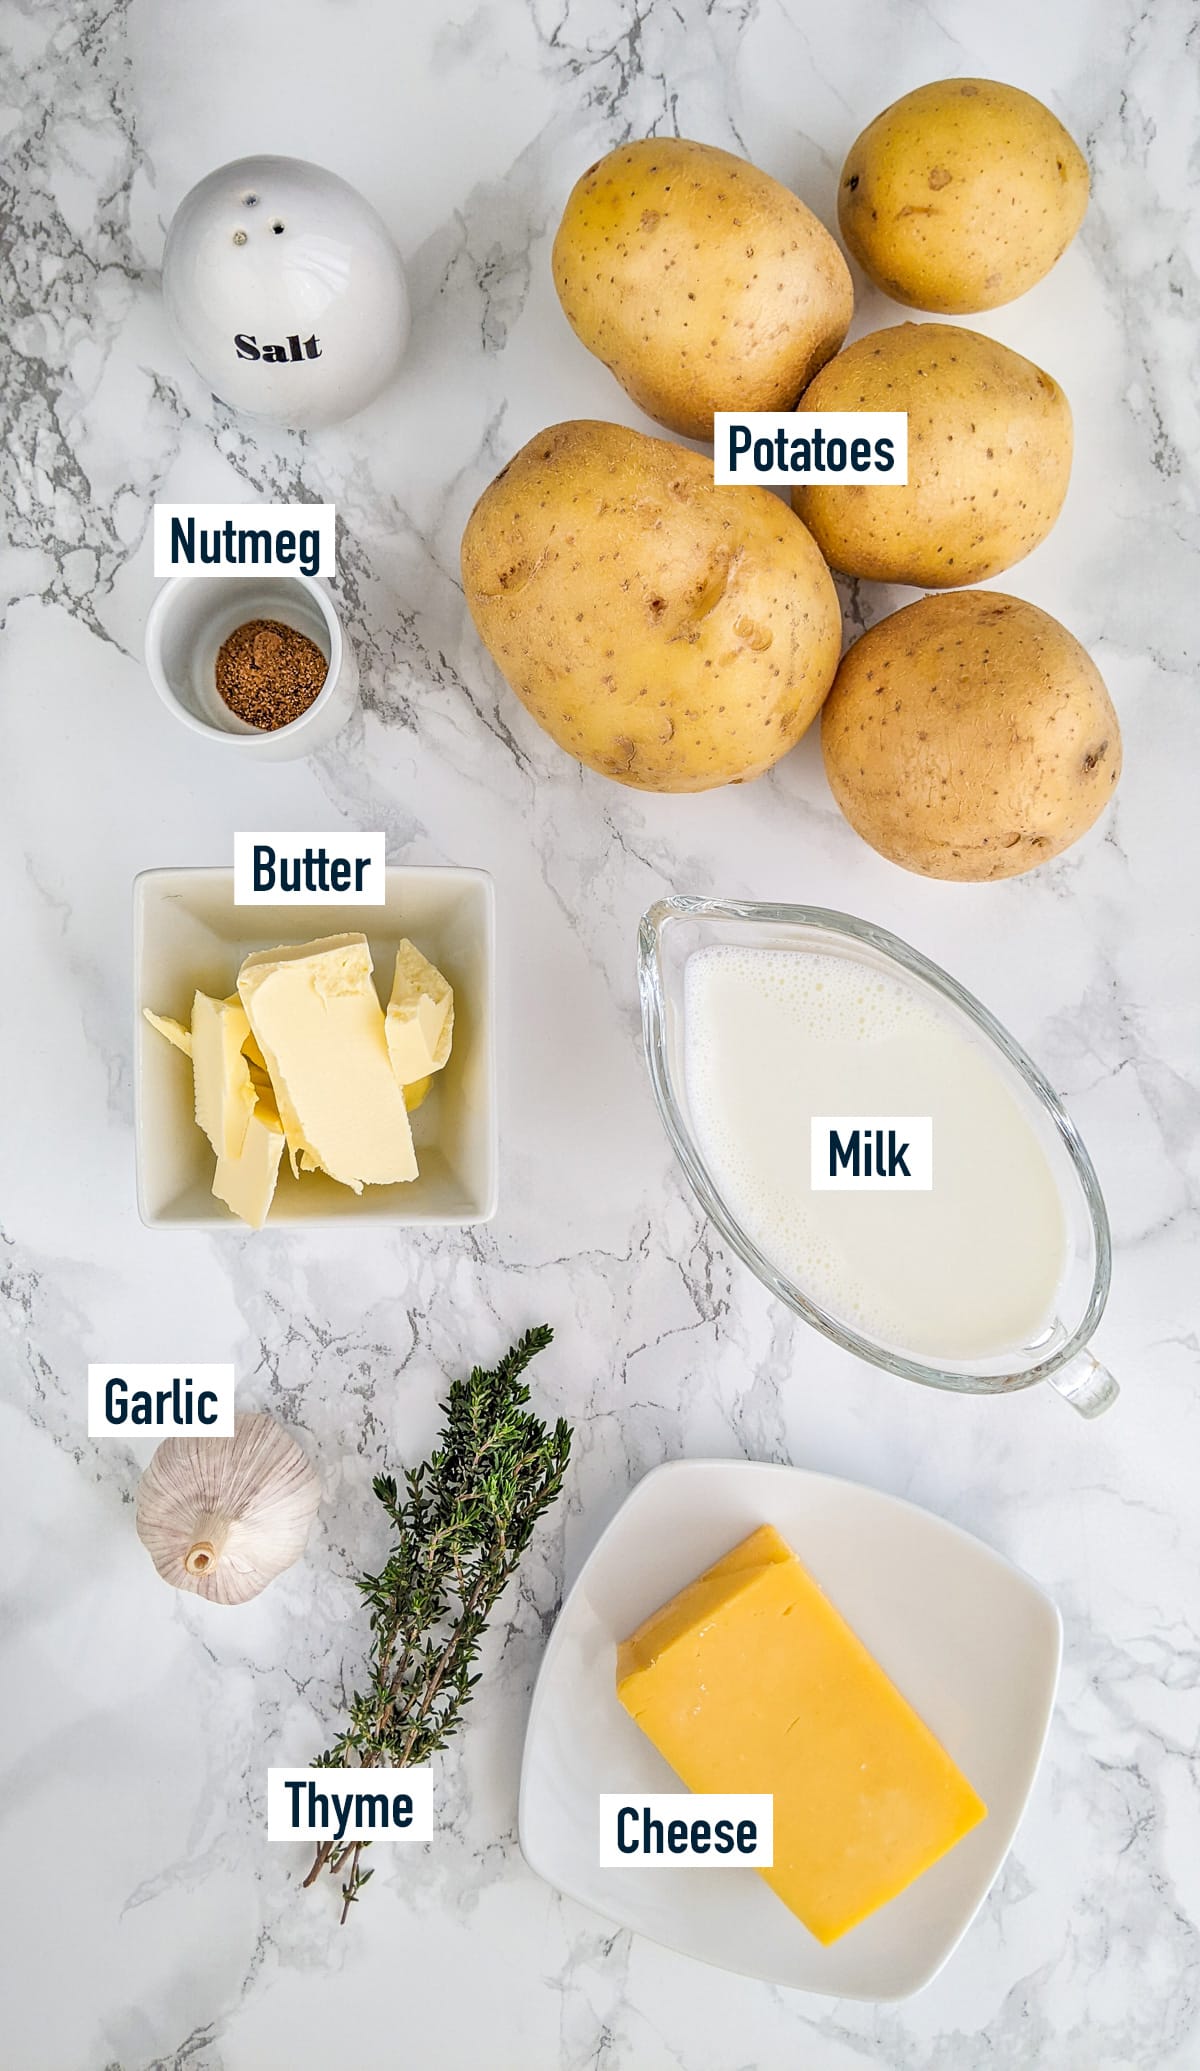 Potatoes, milk, cheese, butter, thyme and garlic on a marble table.